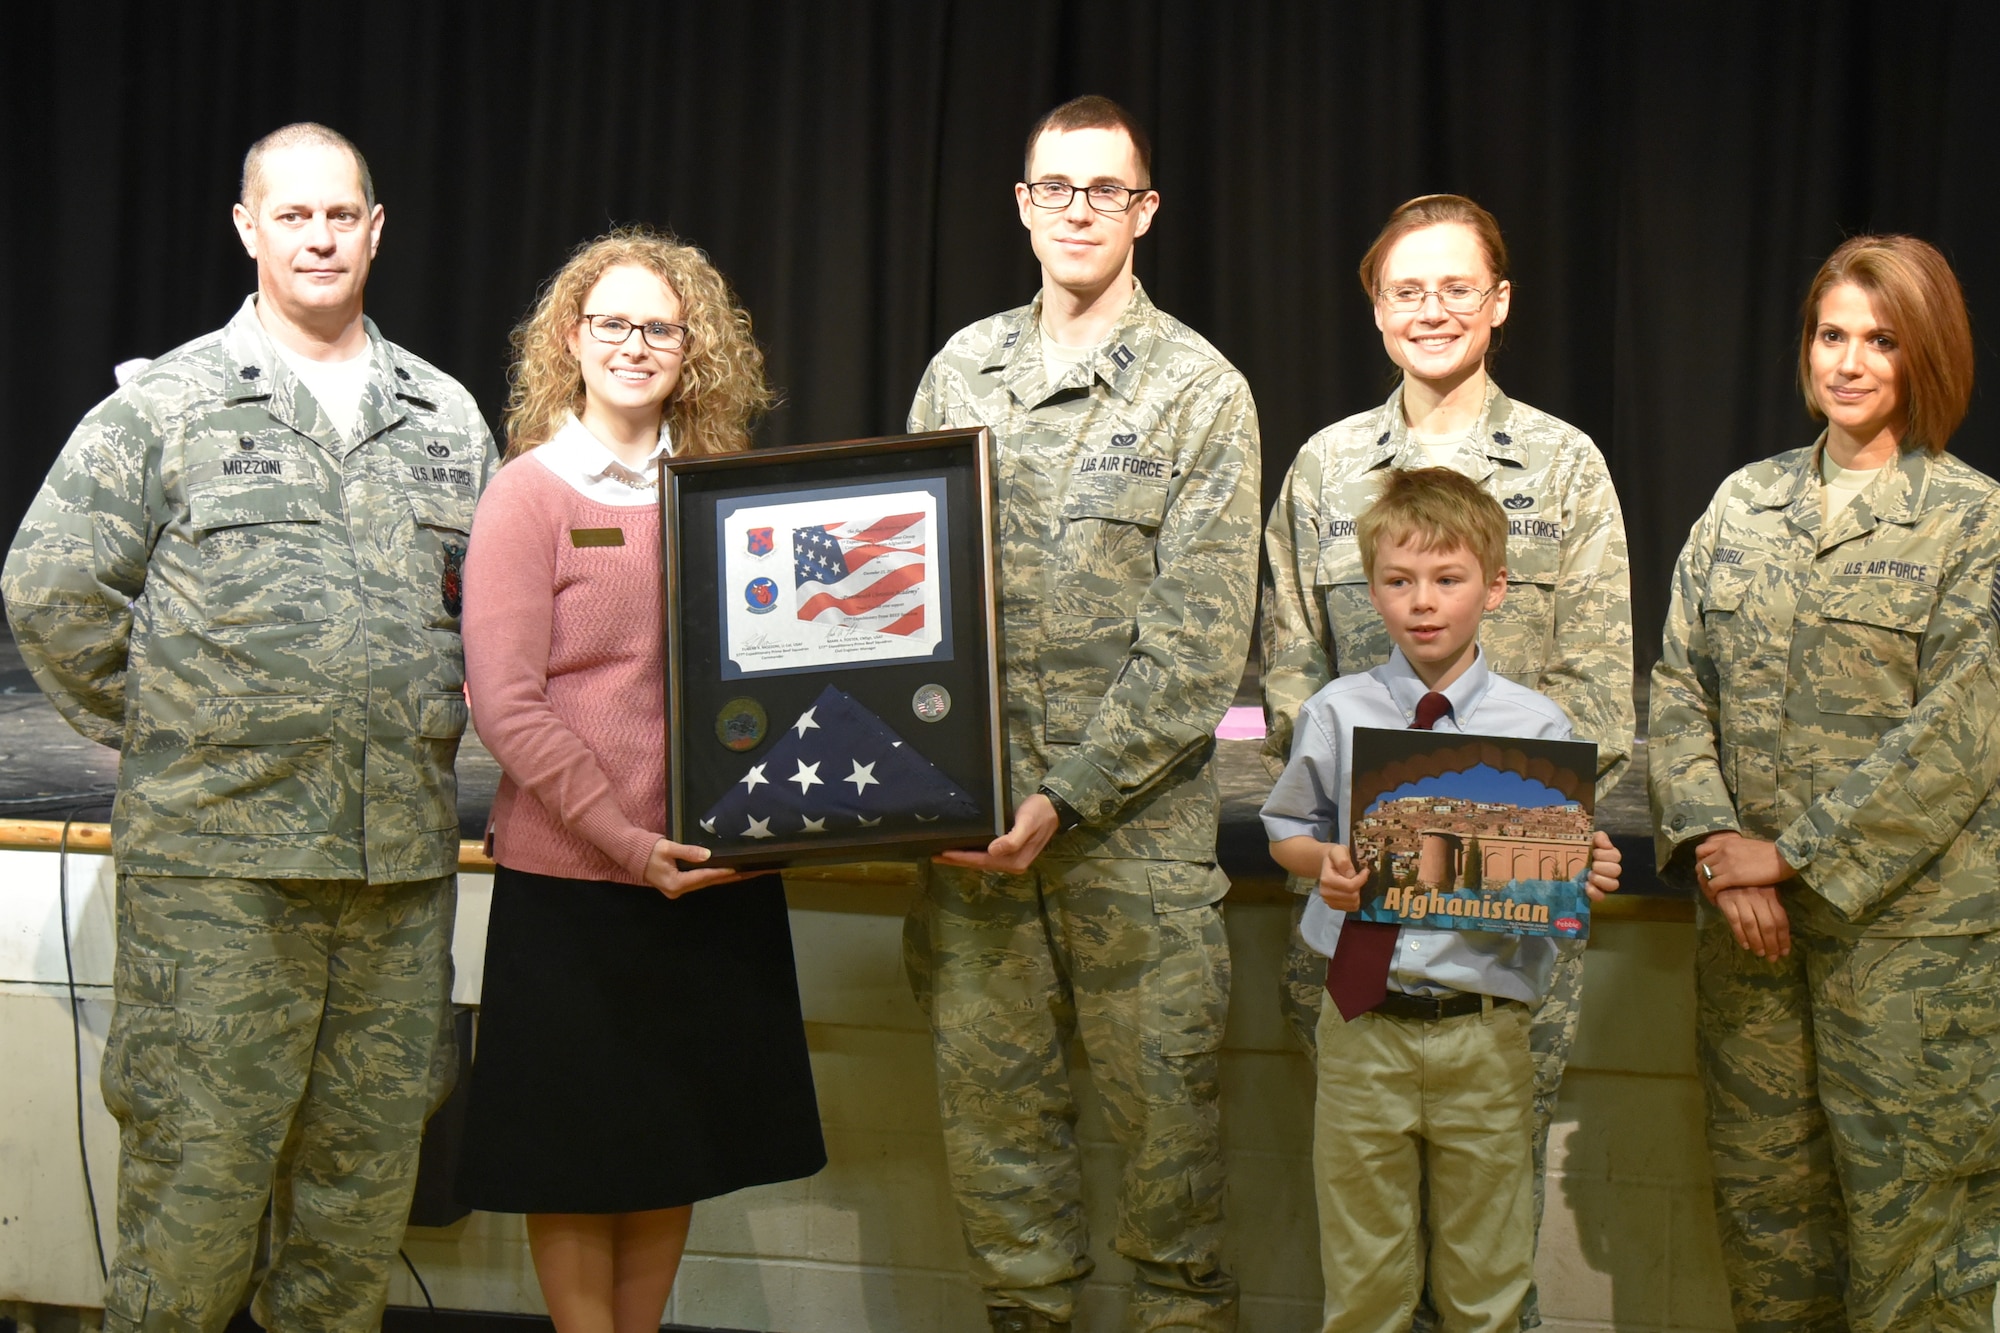 Lt. Col. Eugene R. Mozzoni, 157th Civil Engineer Squadron commander, thanks students during a ceremony at the Portsmouth Christian Academy Elementary School in Dover, N.H. March 30, 2018. Mozzoni presented a flag and certificate to the students during a ceremony thanking the students for sending letters to the engineers while they were deployed to the Middle East. The flag was flown over the country of Kuwait during the last holiday season. (N.H. Air National Guard photo by Mrs. Donna Hall)